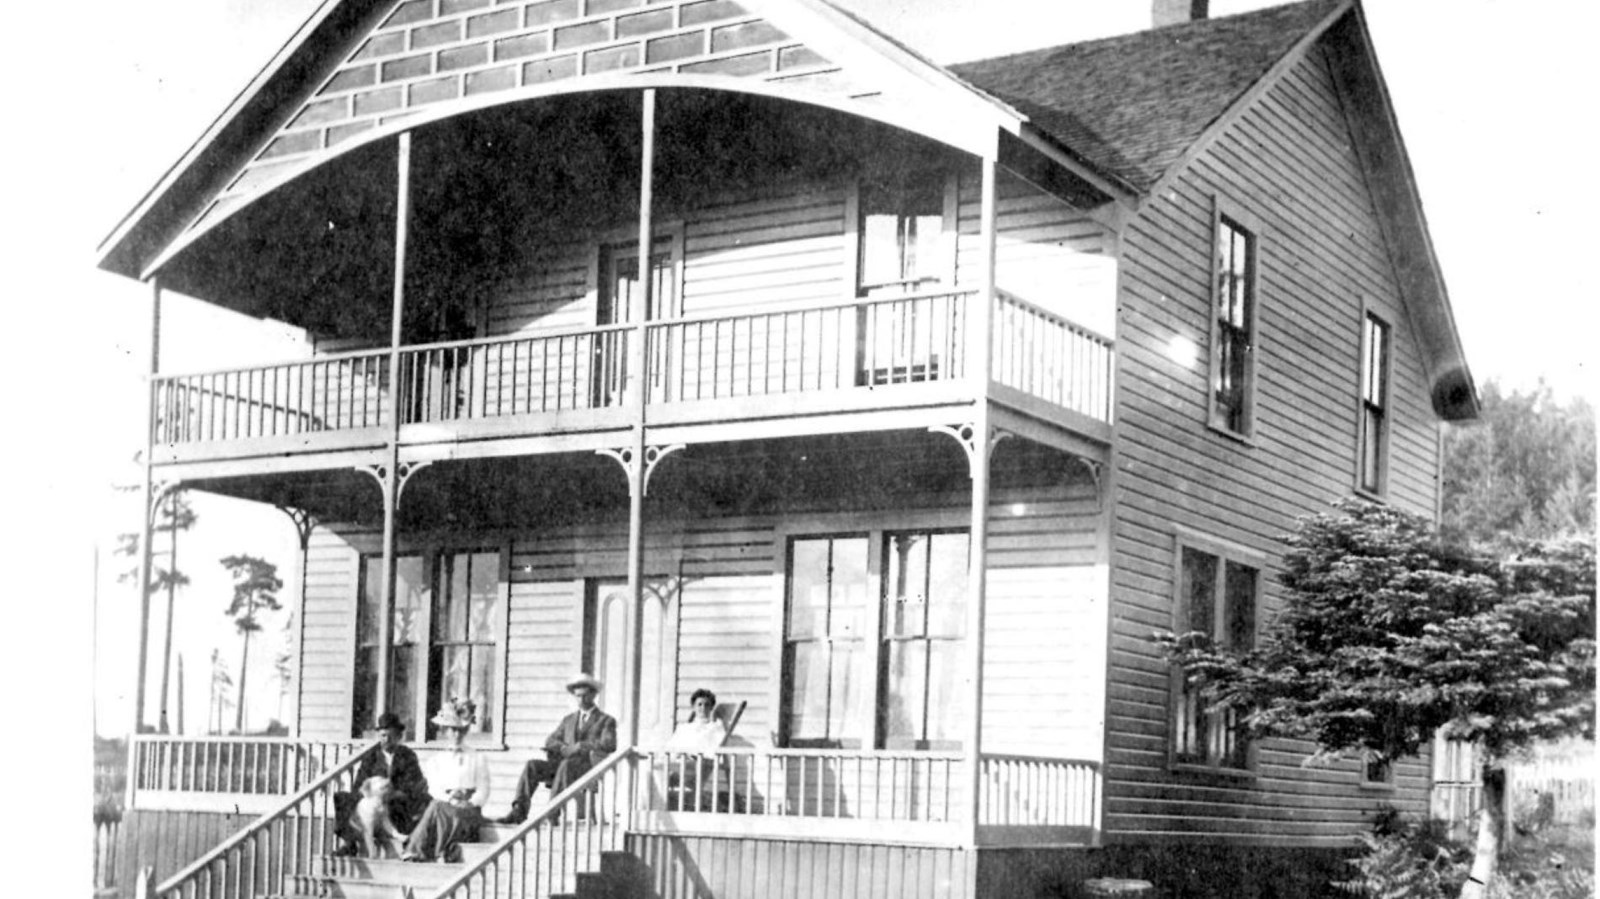 Black and white photograph of a large home constructed of wood and brick with people in front.